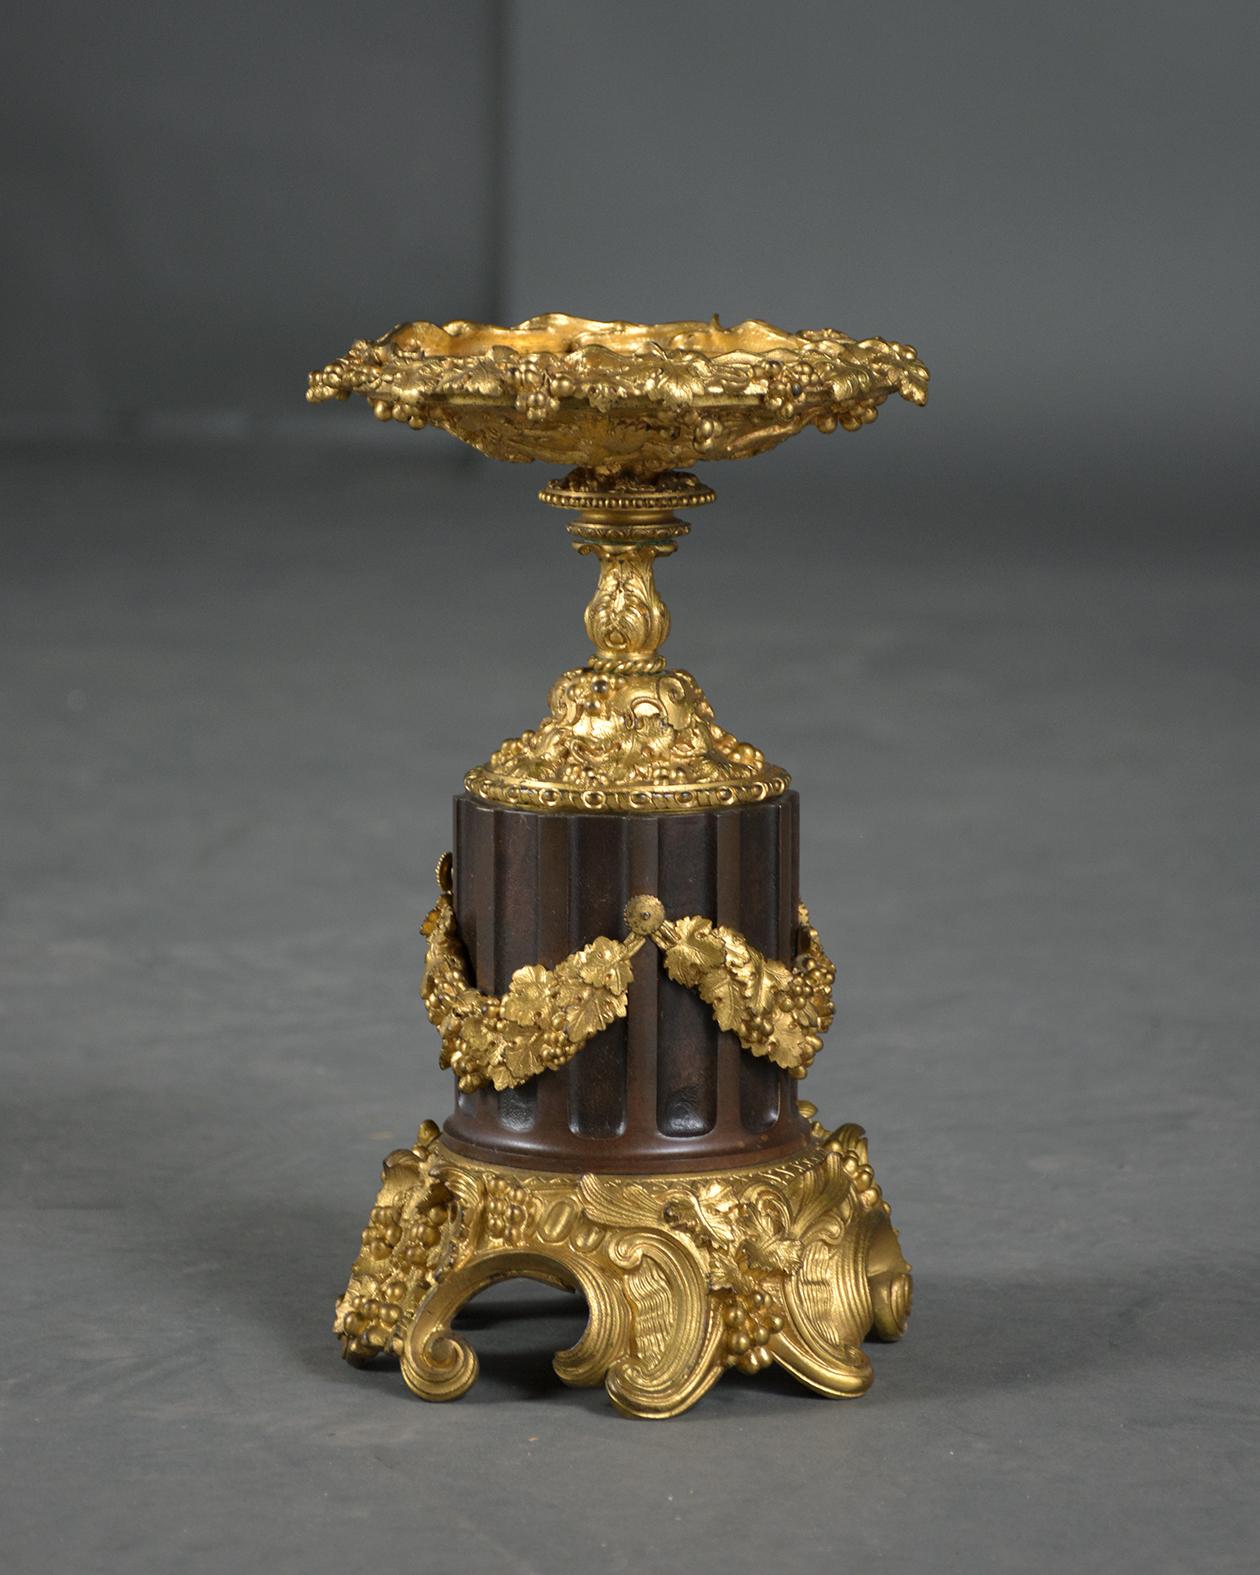 Elegant 19th-Century French Bronzed Urns with Gold Ormolu Details For Sale 3